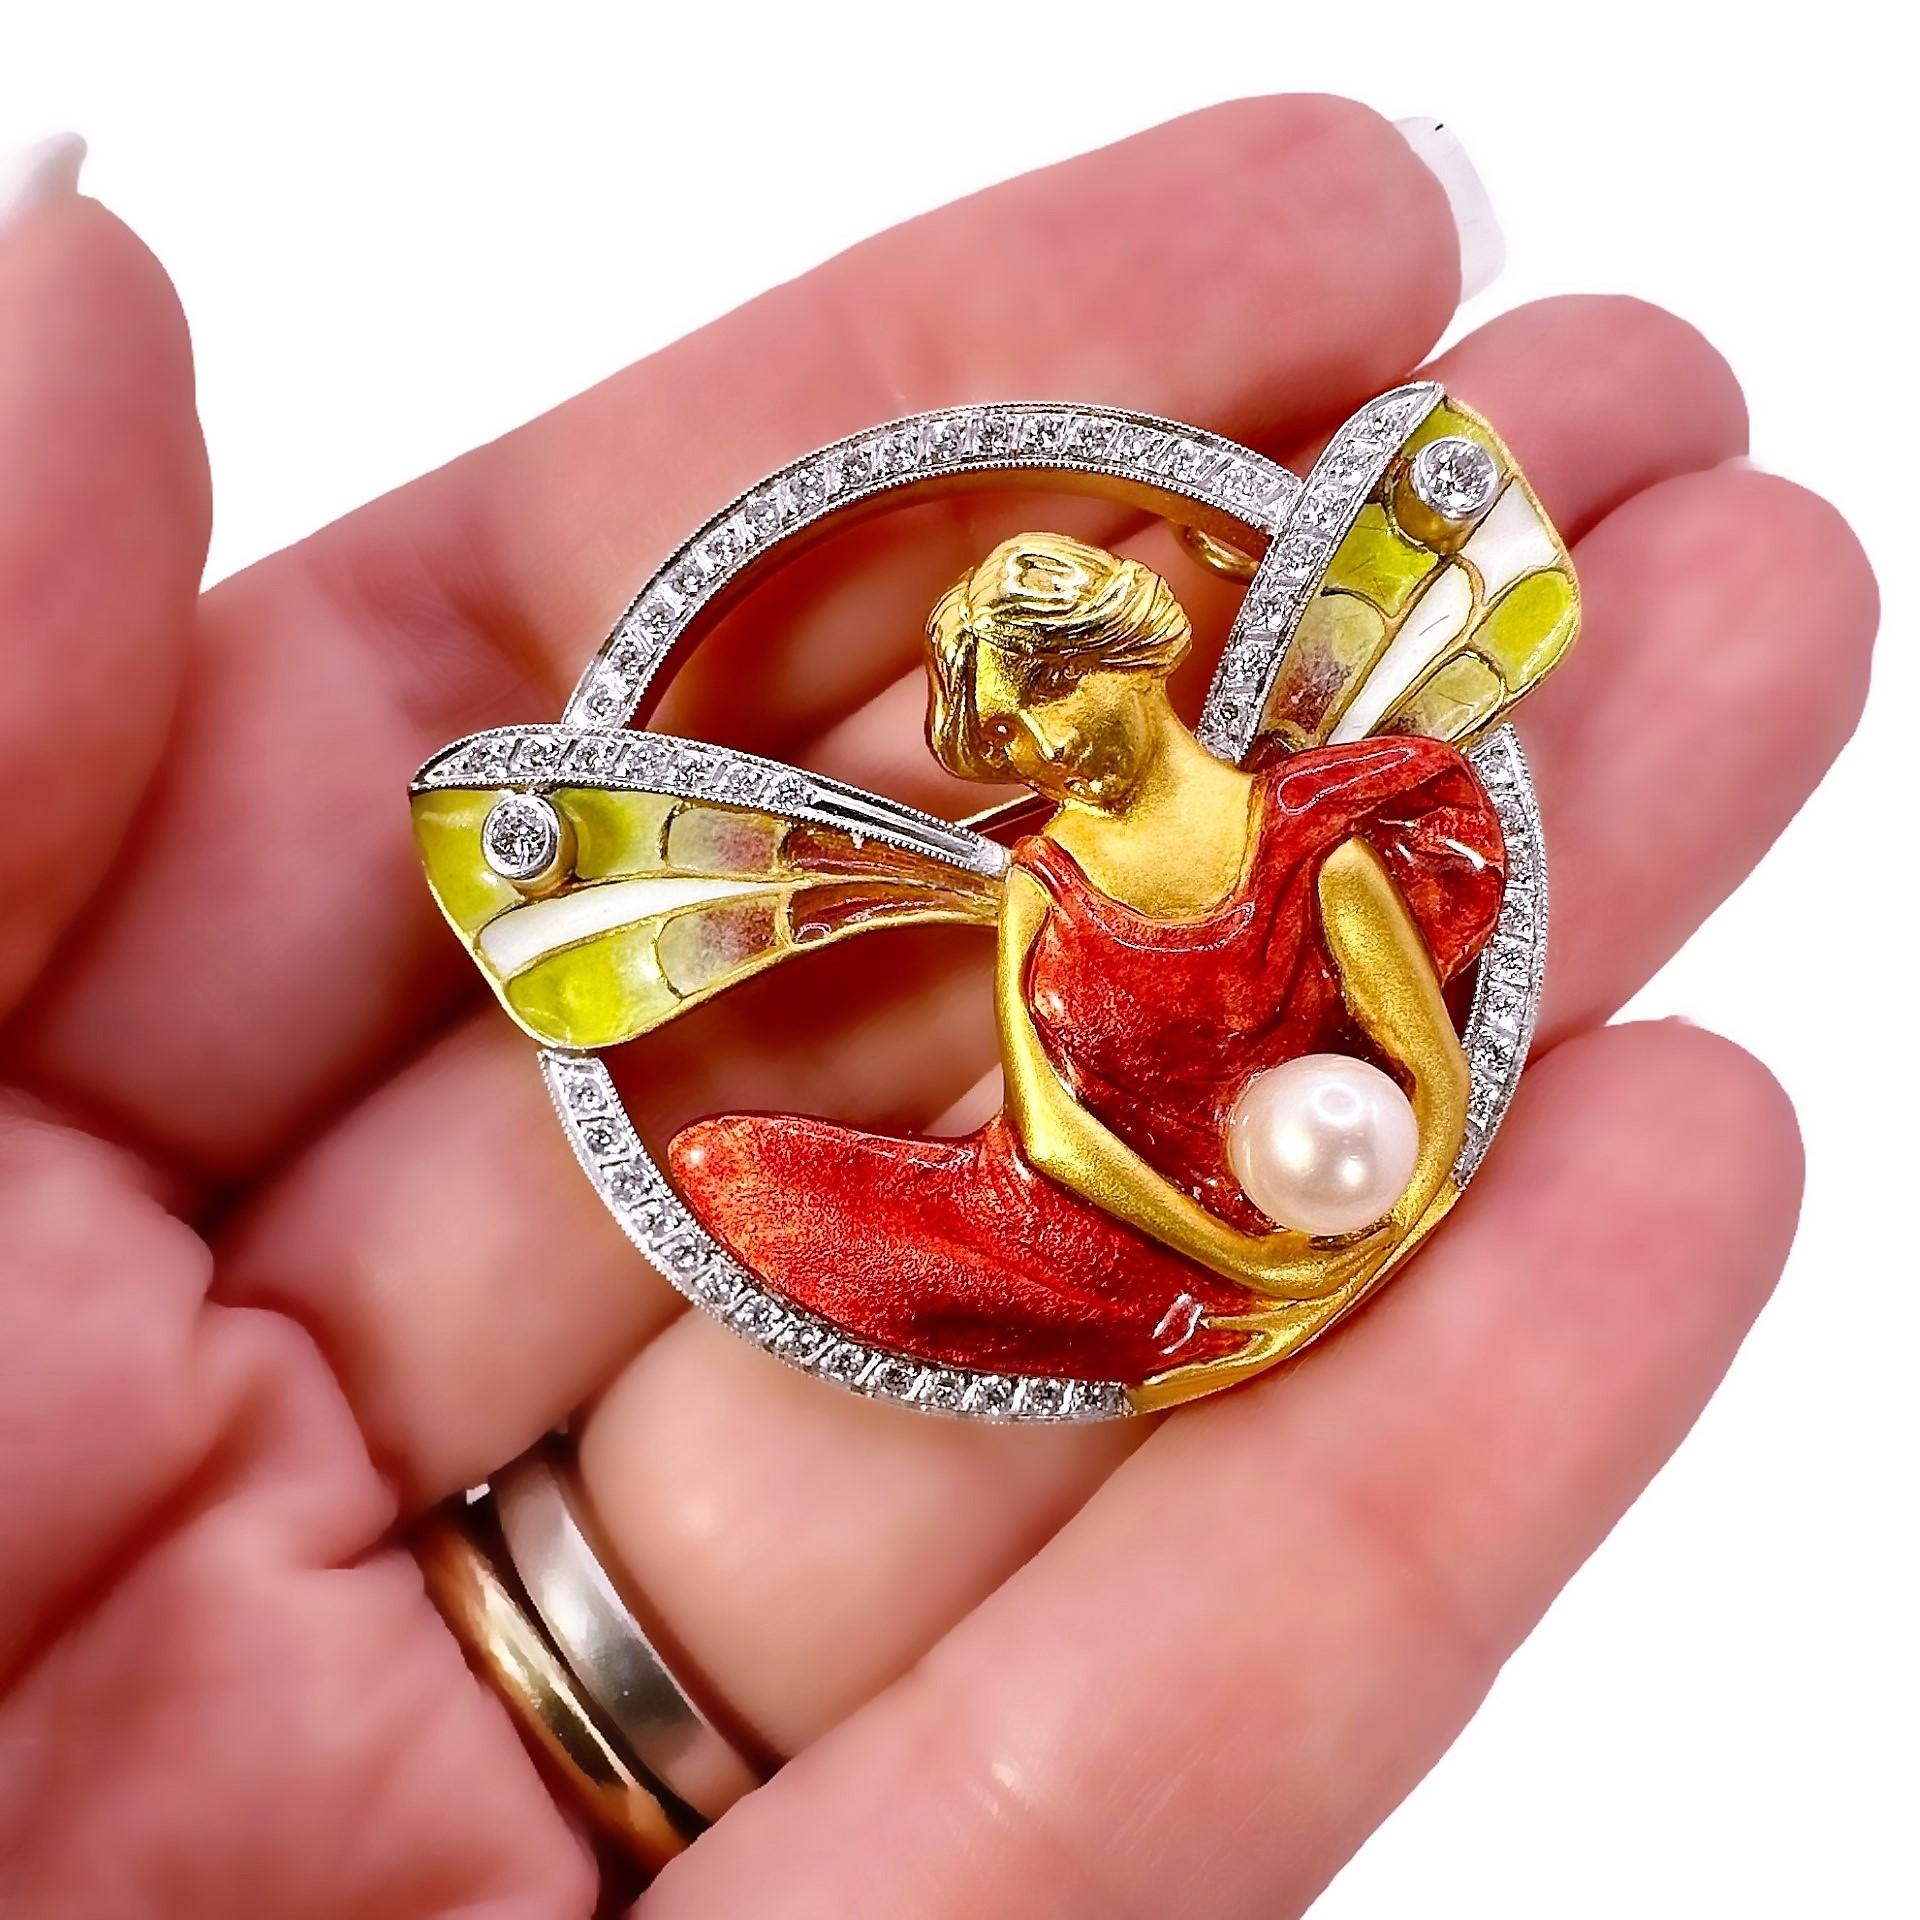 Women's Exquisite Masriera Mythological Nymph Brooch in Gold, Diamonds, Pearl and Enamel For Sale